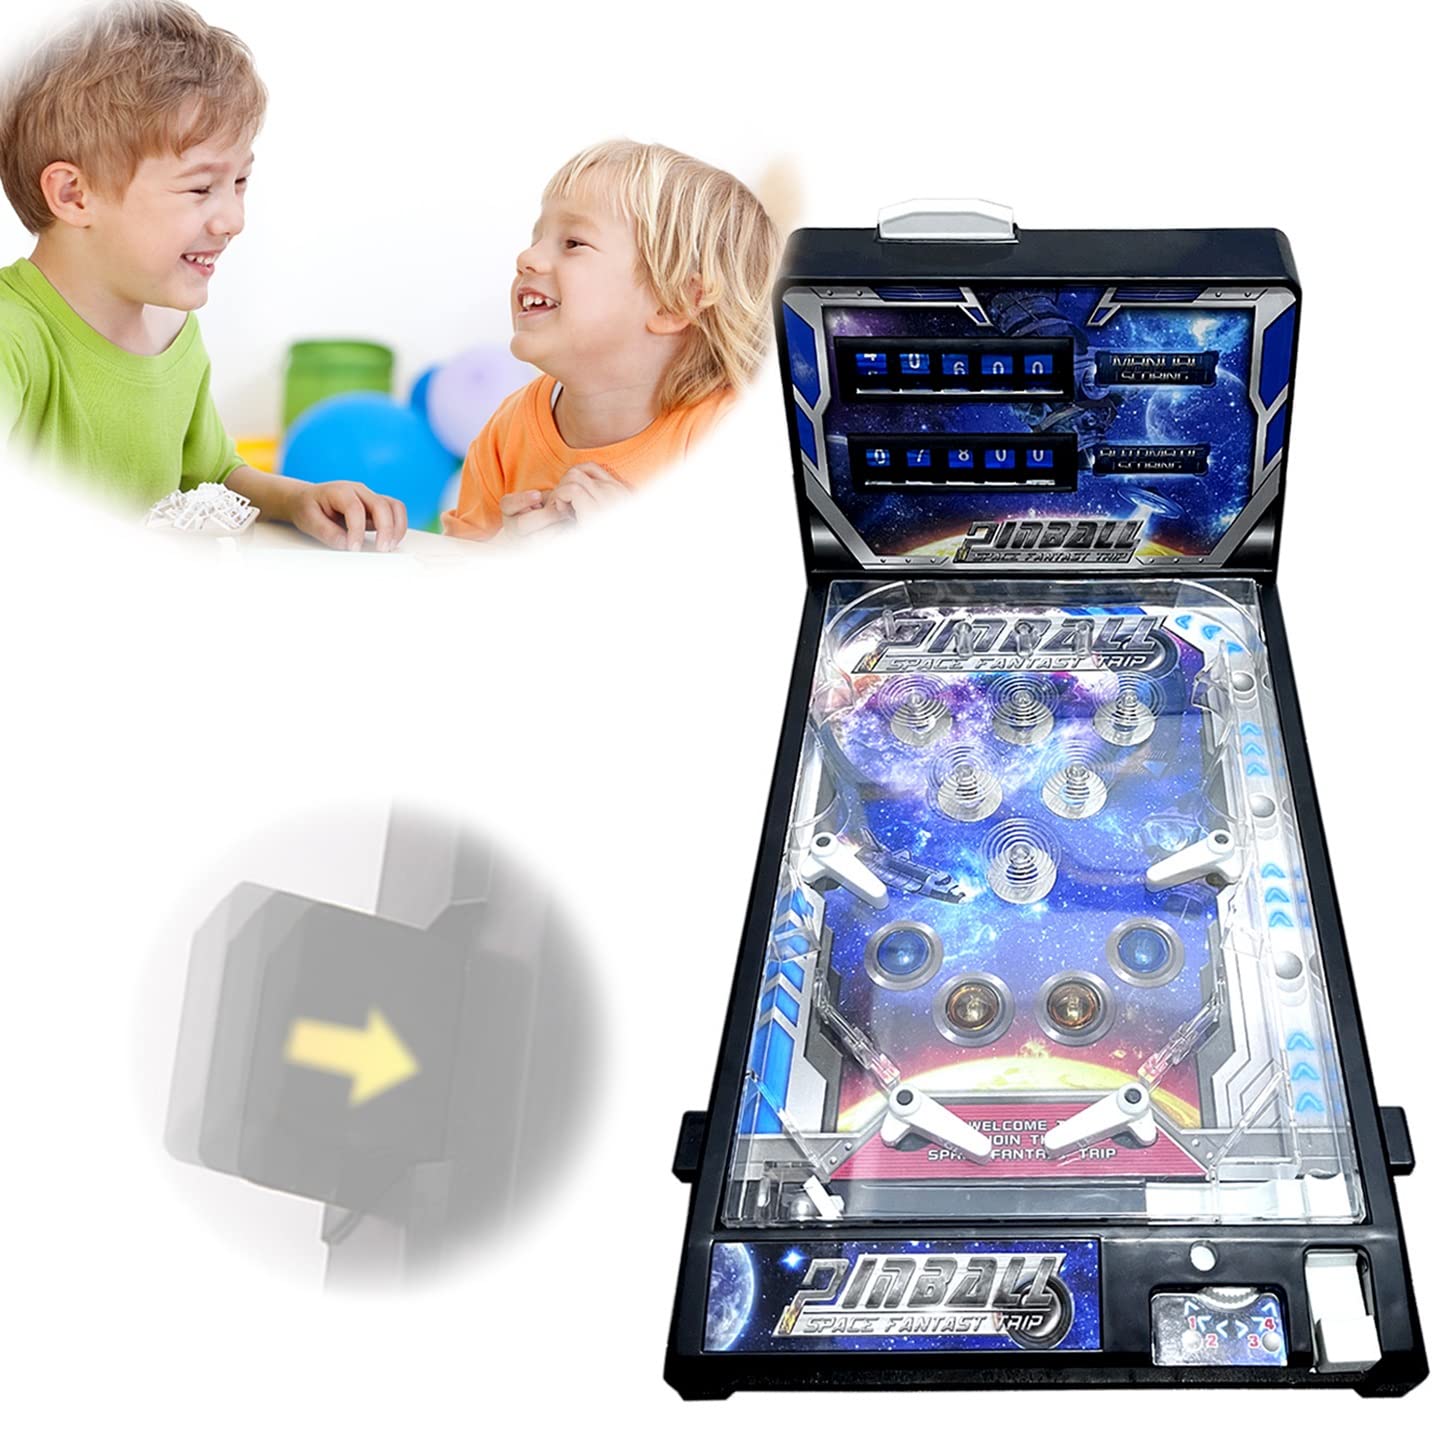 YOXALL Space Electronic Pinball Machine Arcade Pinball Toy classic Interactive Entertainment game Kids Novelty Pinball Toy The I